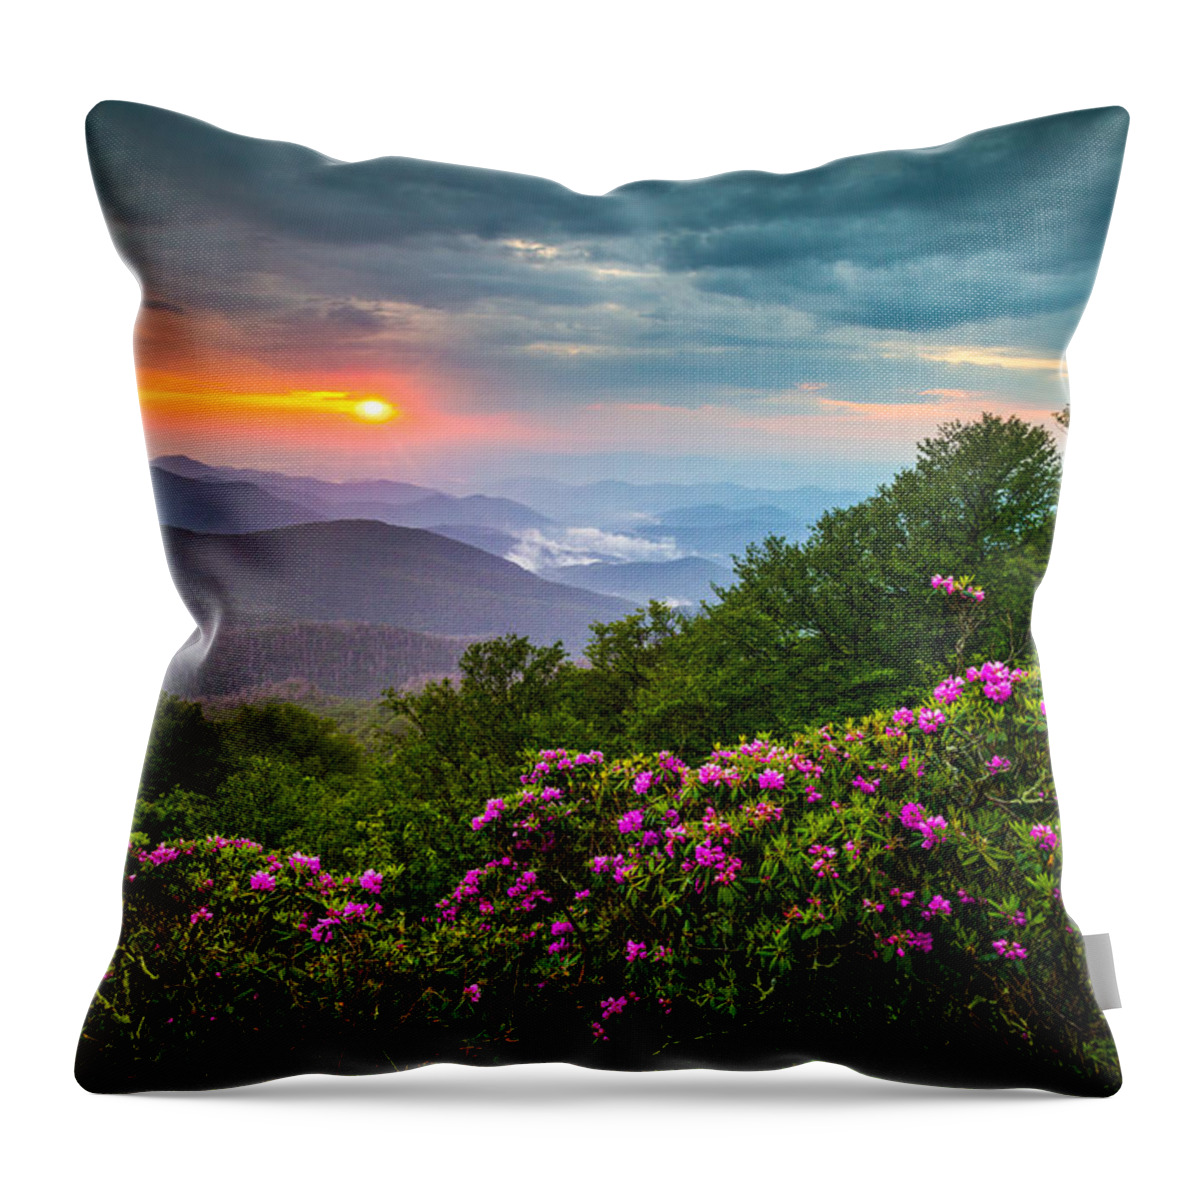 North Carolina Throw Pillow featuring the photograph Asheville North Carolina Blue Ridge Parkway Scenic Landscape #1 by Dave Allen